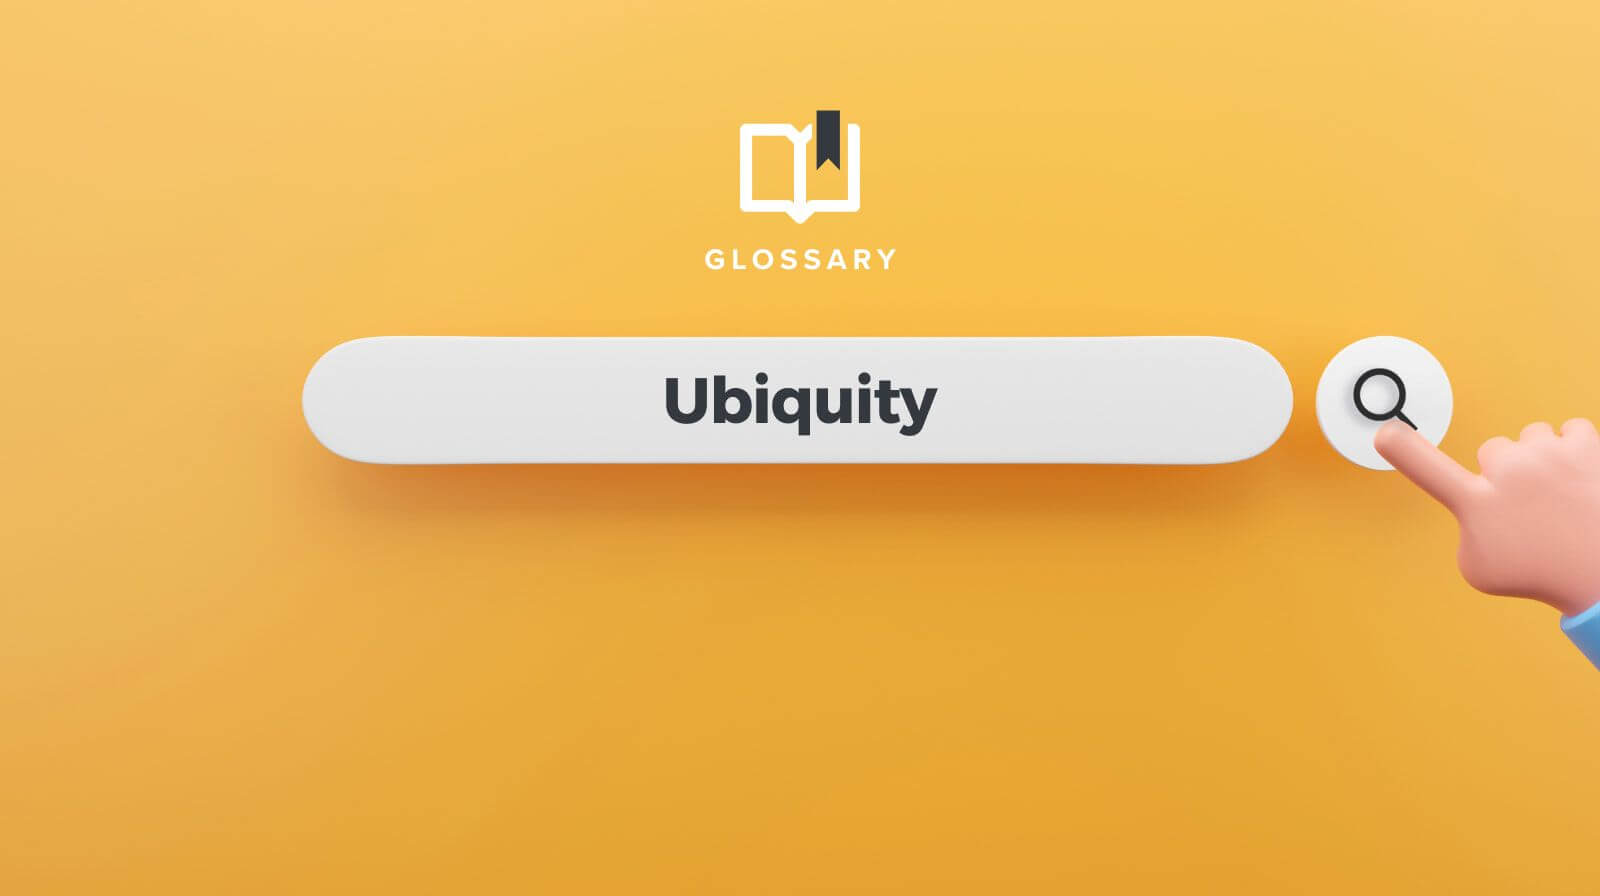  Featured image: What is Ubiquity? - Read full post: What is Ubiquity?